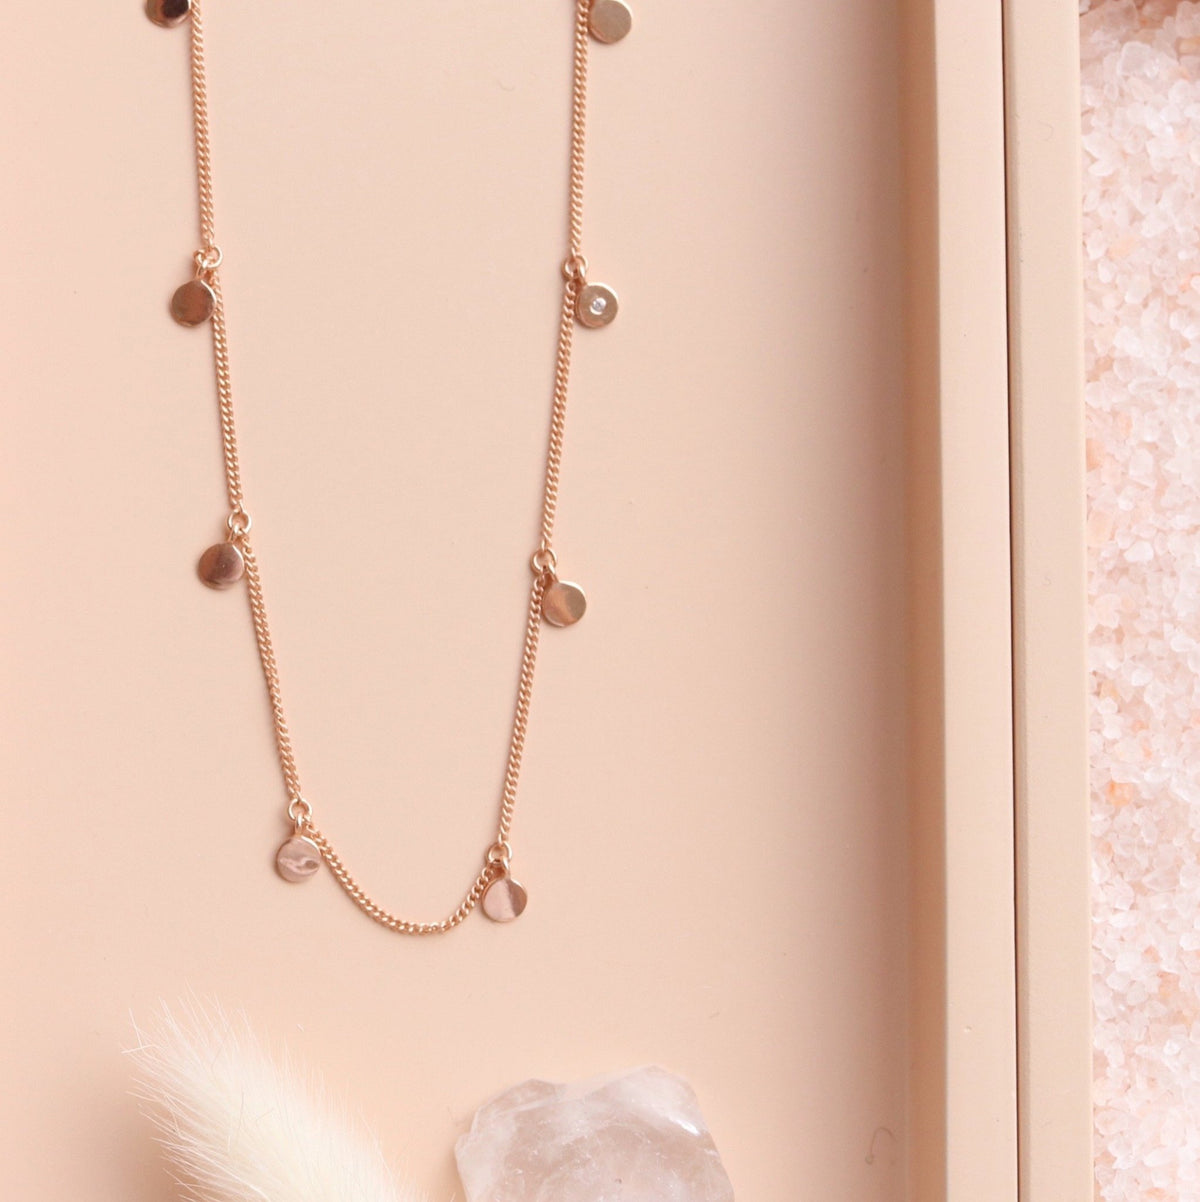 POISE LONG DISK NECKLACE - ROSE GOLD - SO PRETTY CARA COTTER